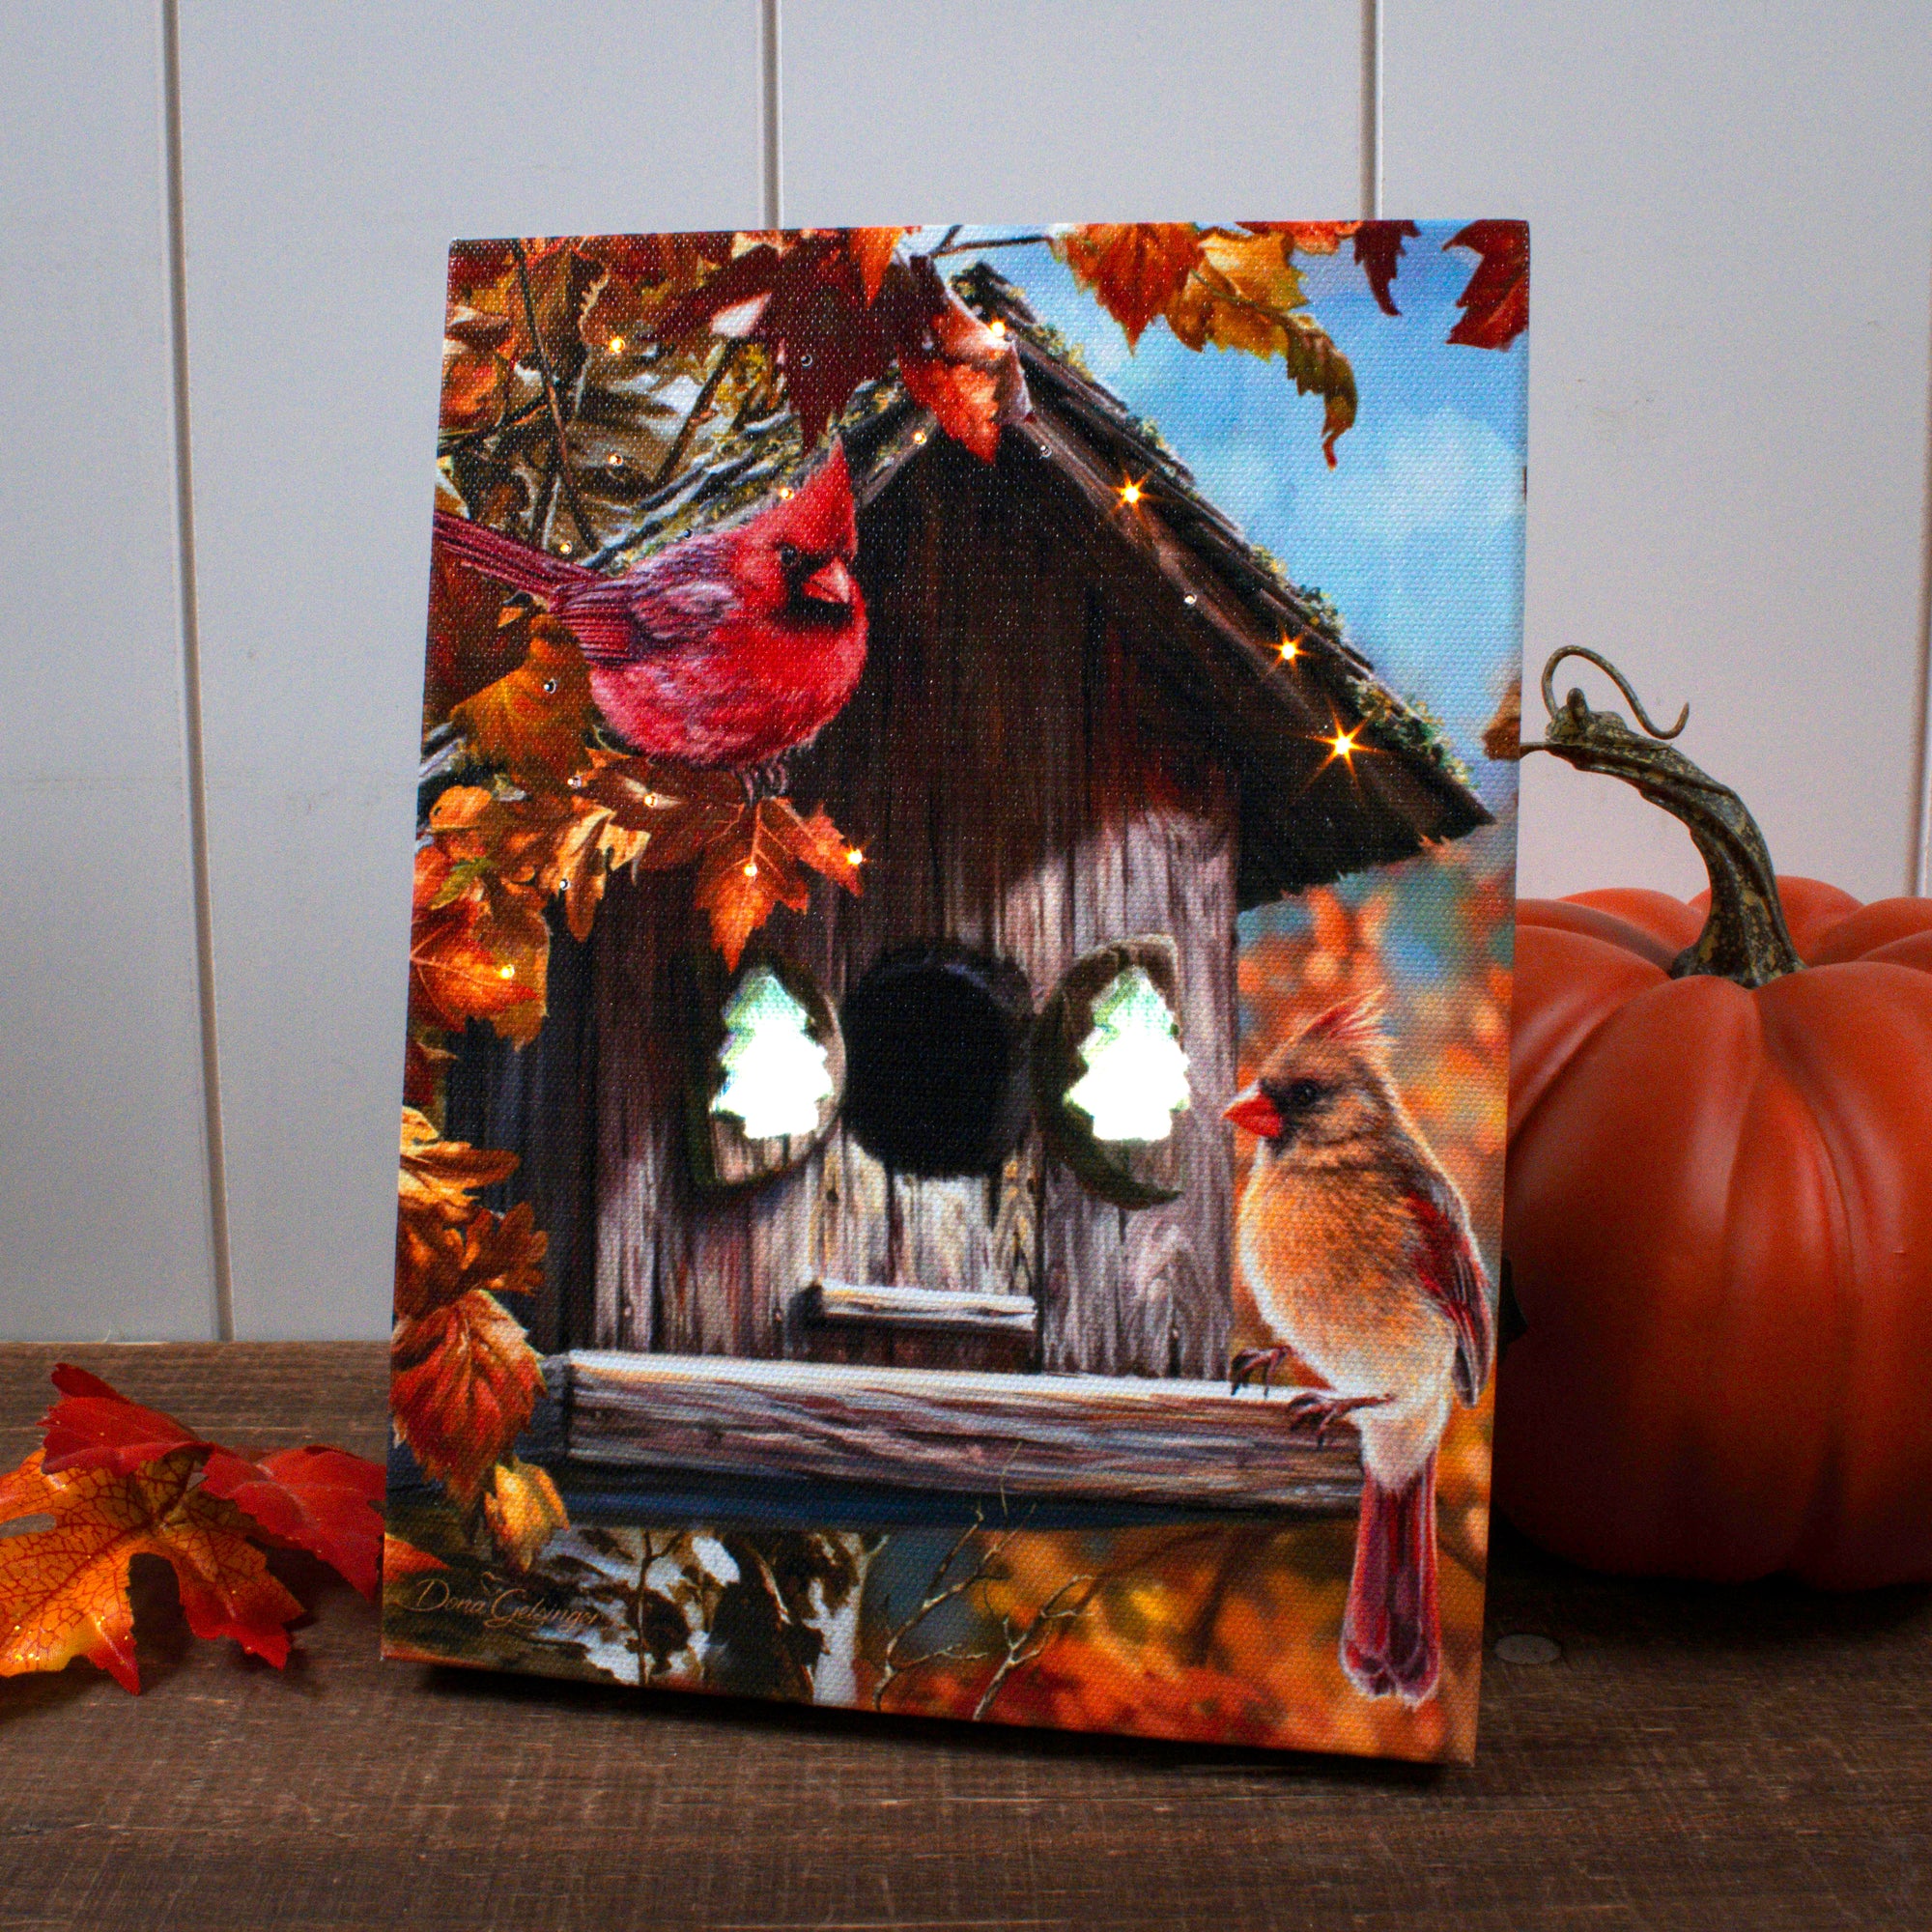 Fall Cardinals 8x6 Lighted Tabletop Canvas